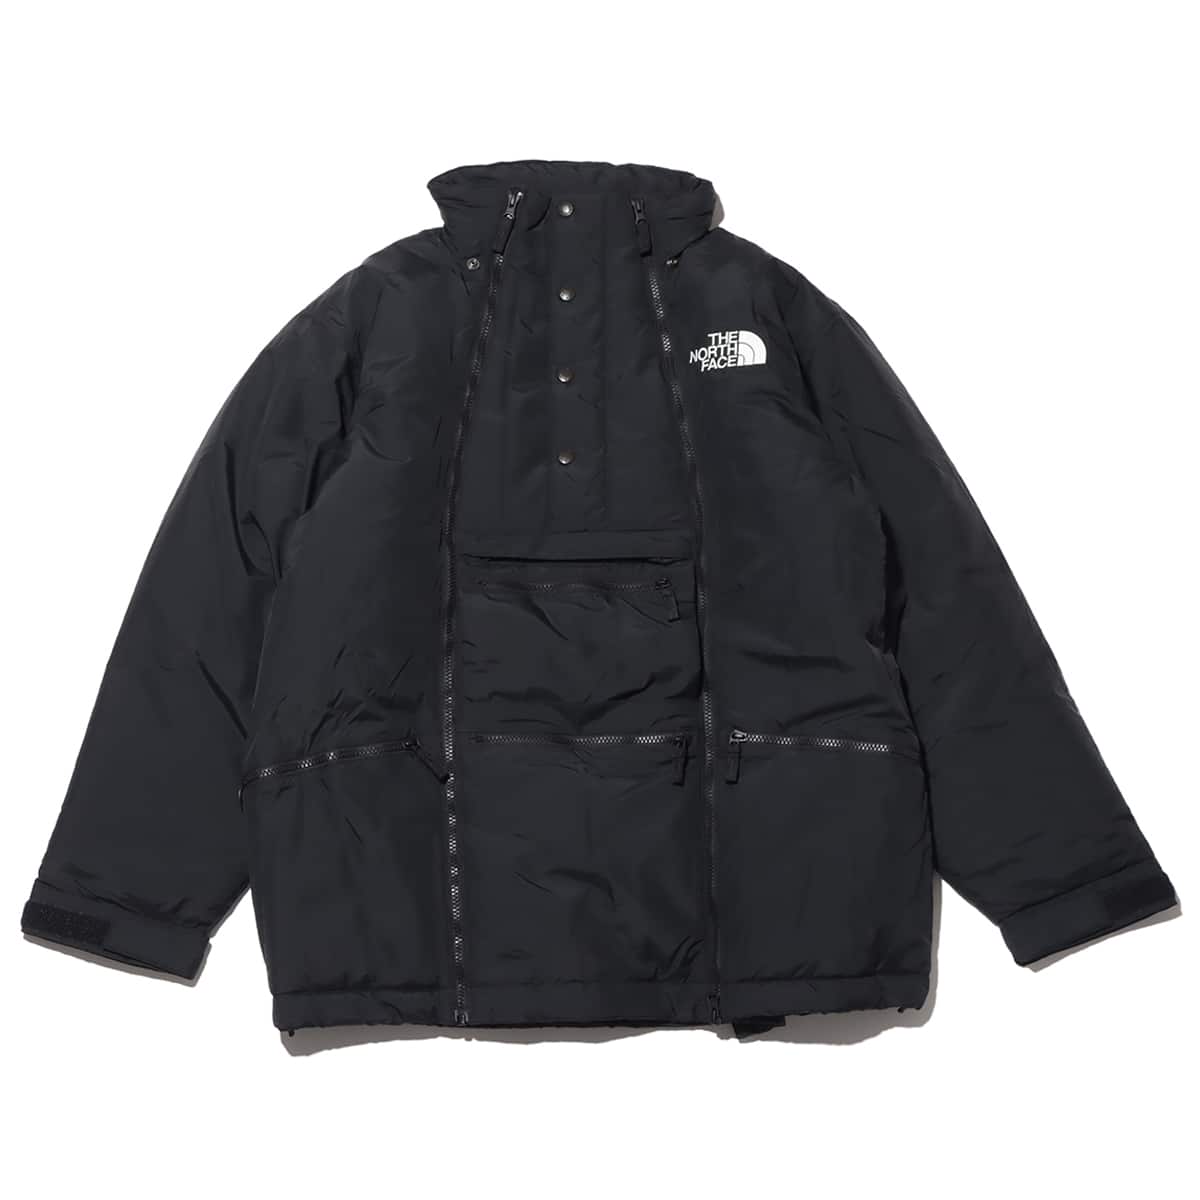 THE NORTH FACE CR INSULATION JACKET BLACK 23FW-I